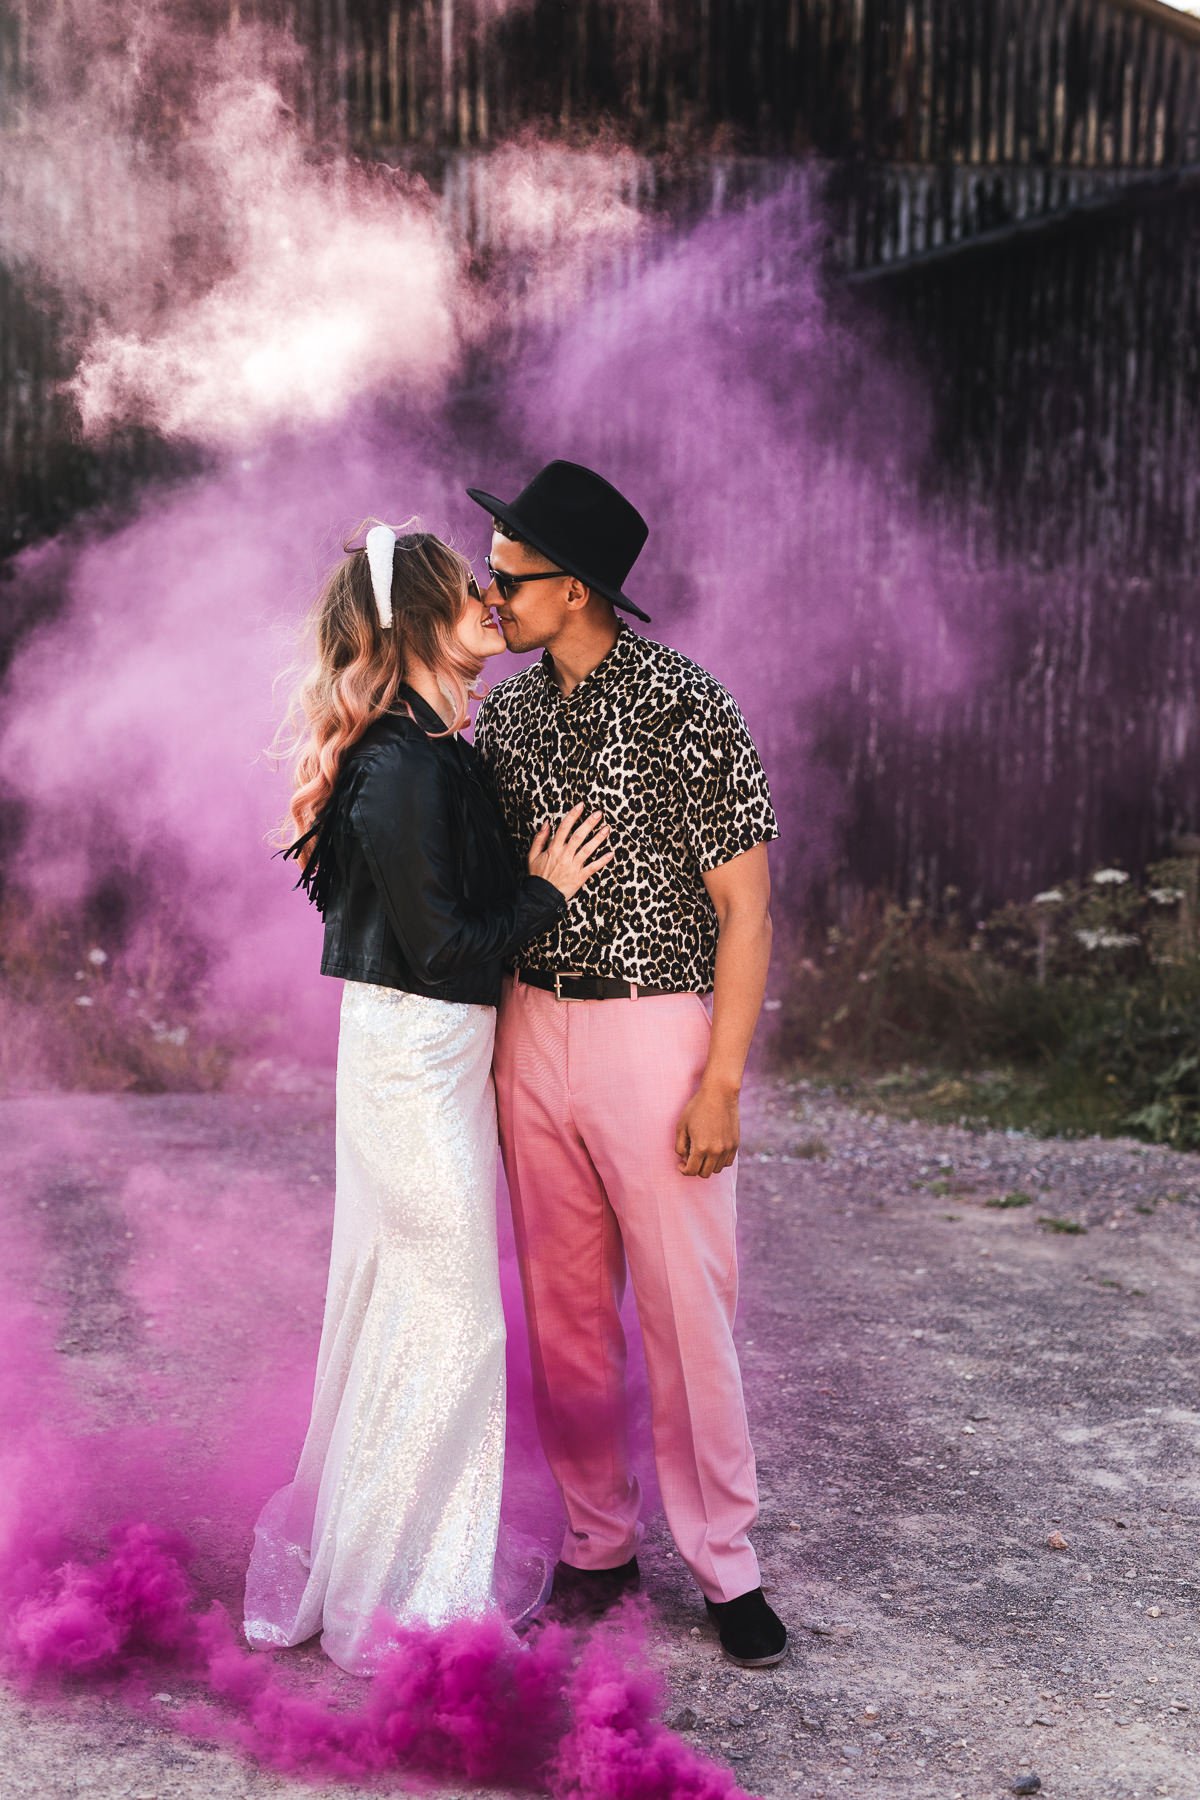 You're So Cool - A True Romance Inspired Styled Shoot